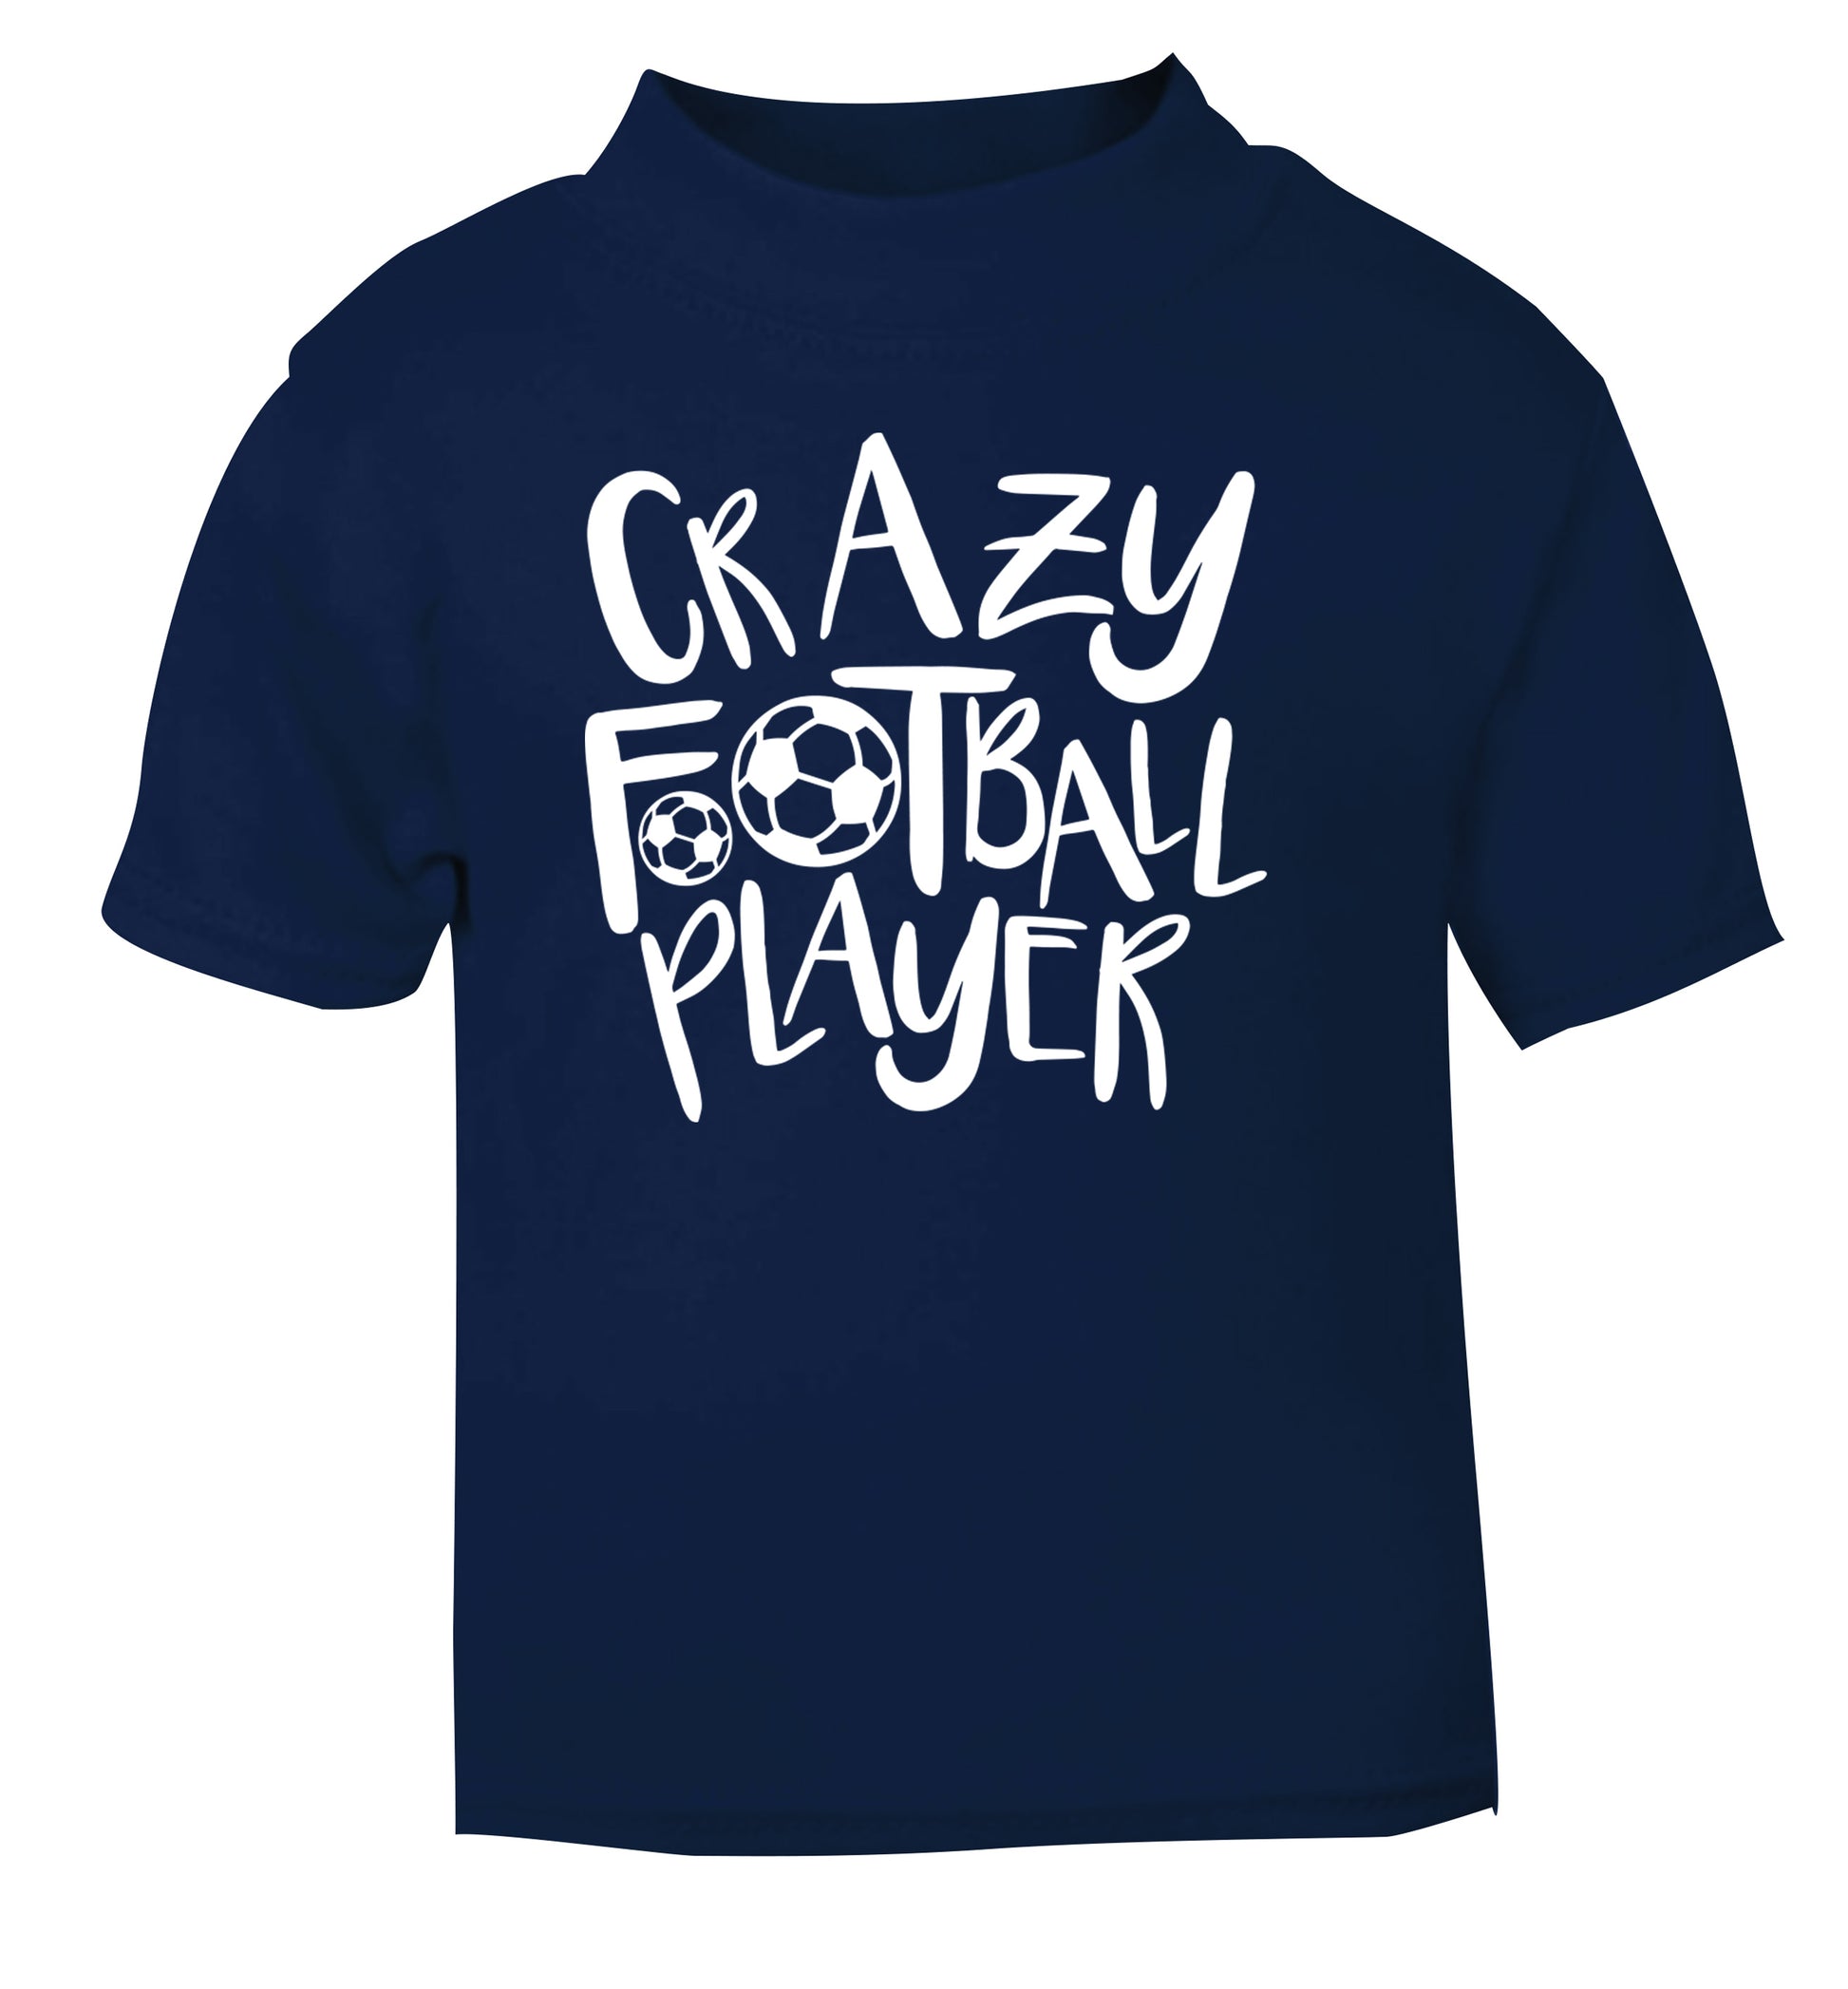 Crazy football player navy Baby Toddler Tshirt 2 Years